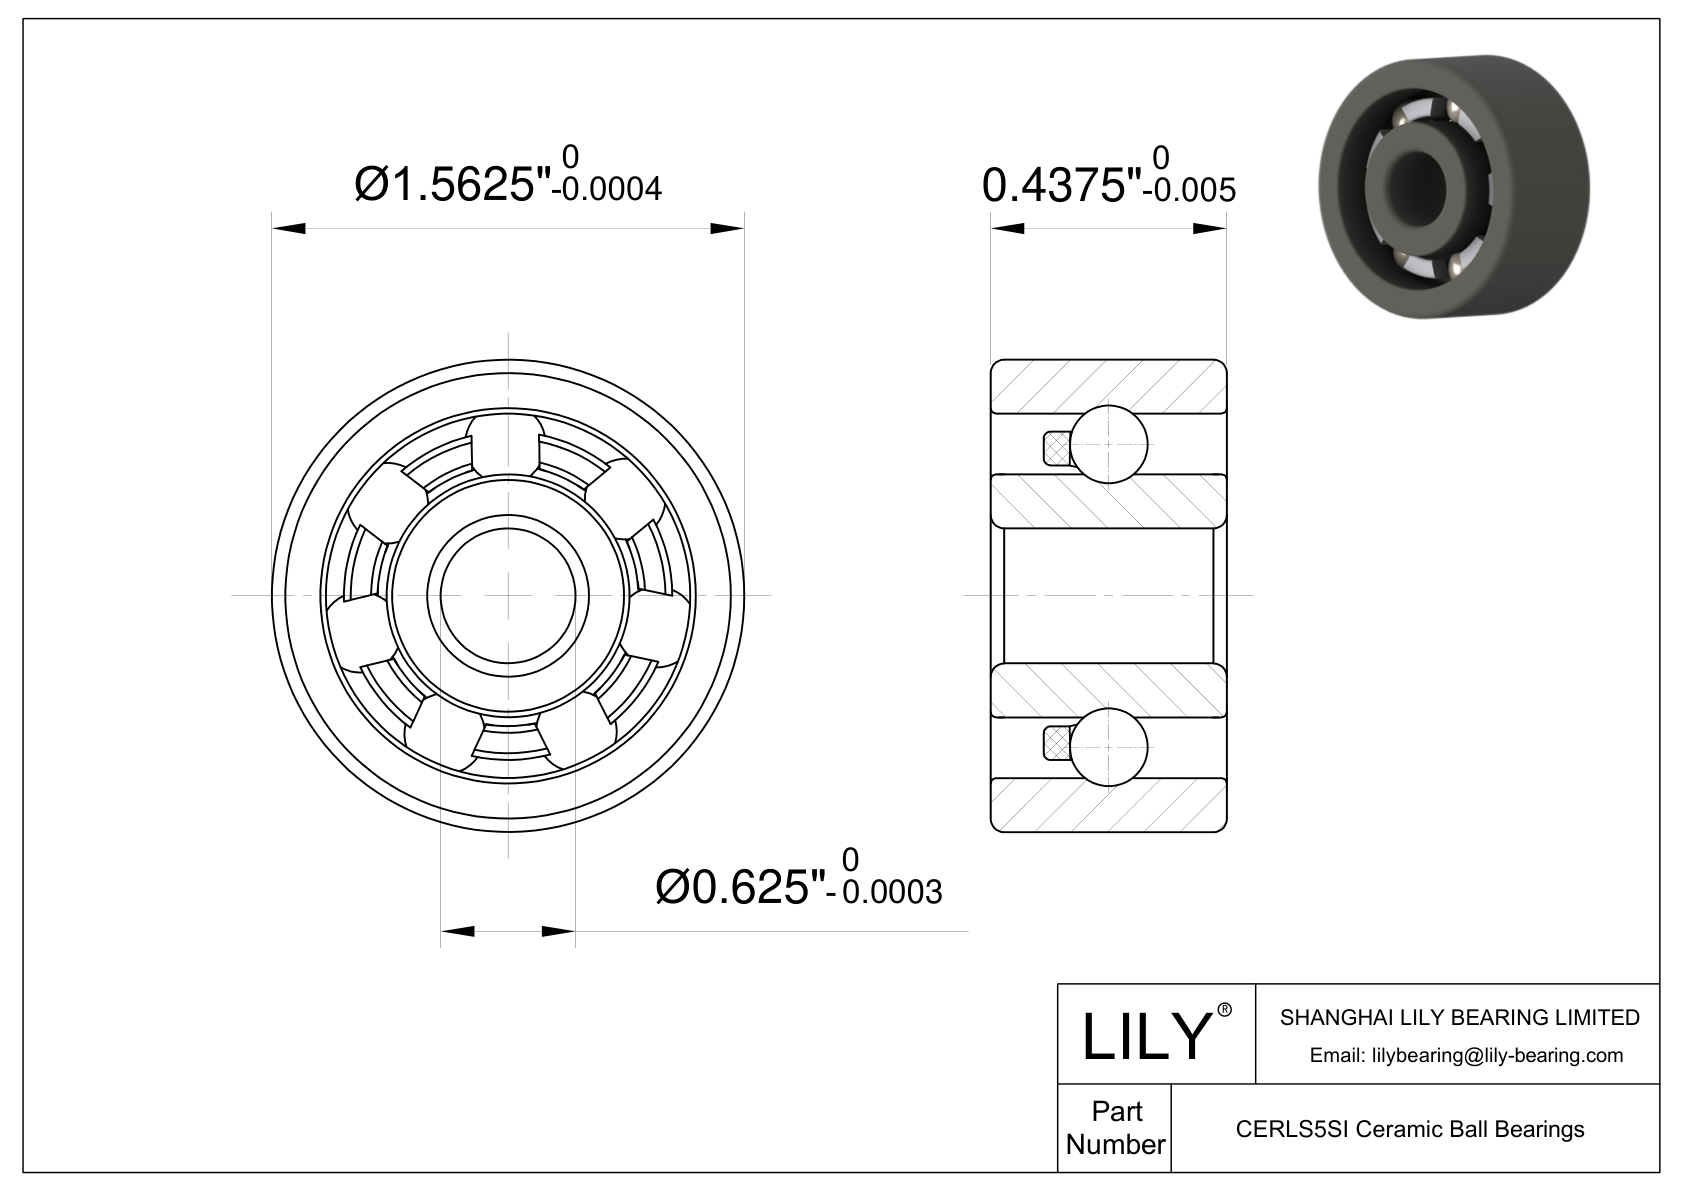 CESI RLS5 Inch Size Silicon Nitride Ceramic Bearings cad drawing